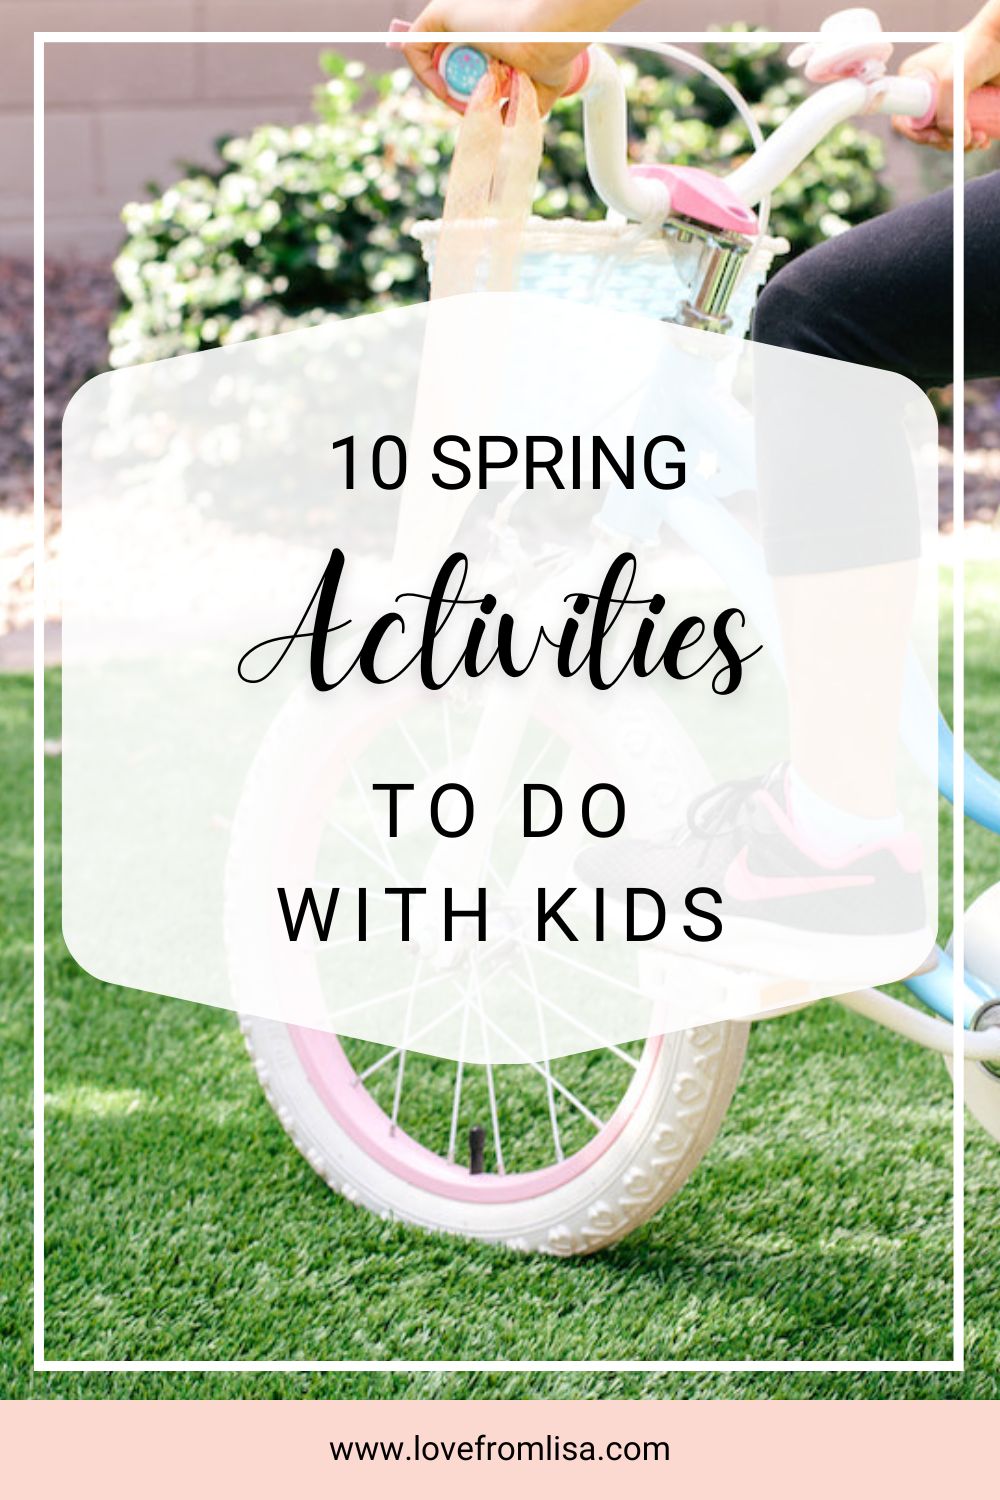 10 spring activities to do with kids Pinterest graphic